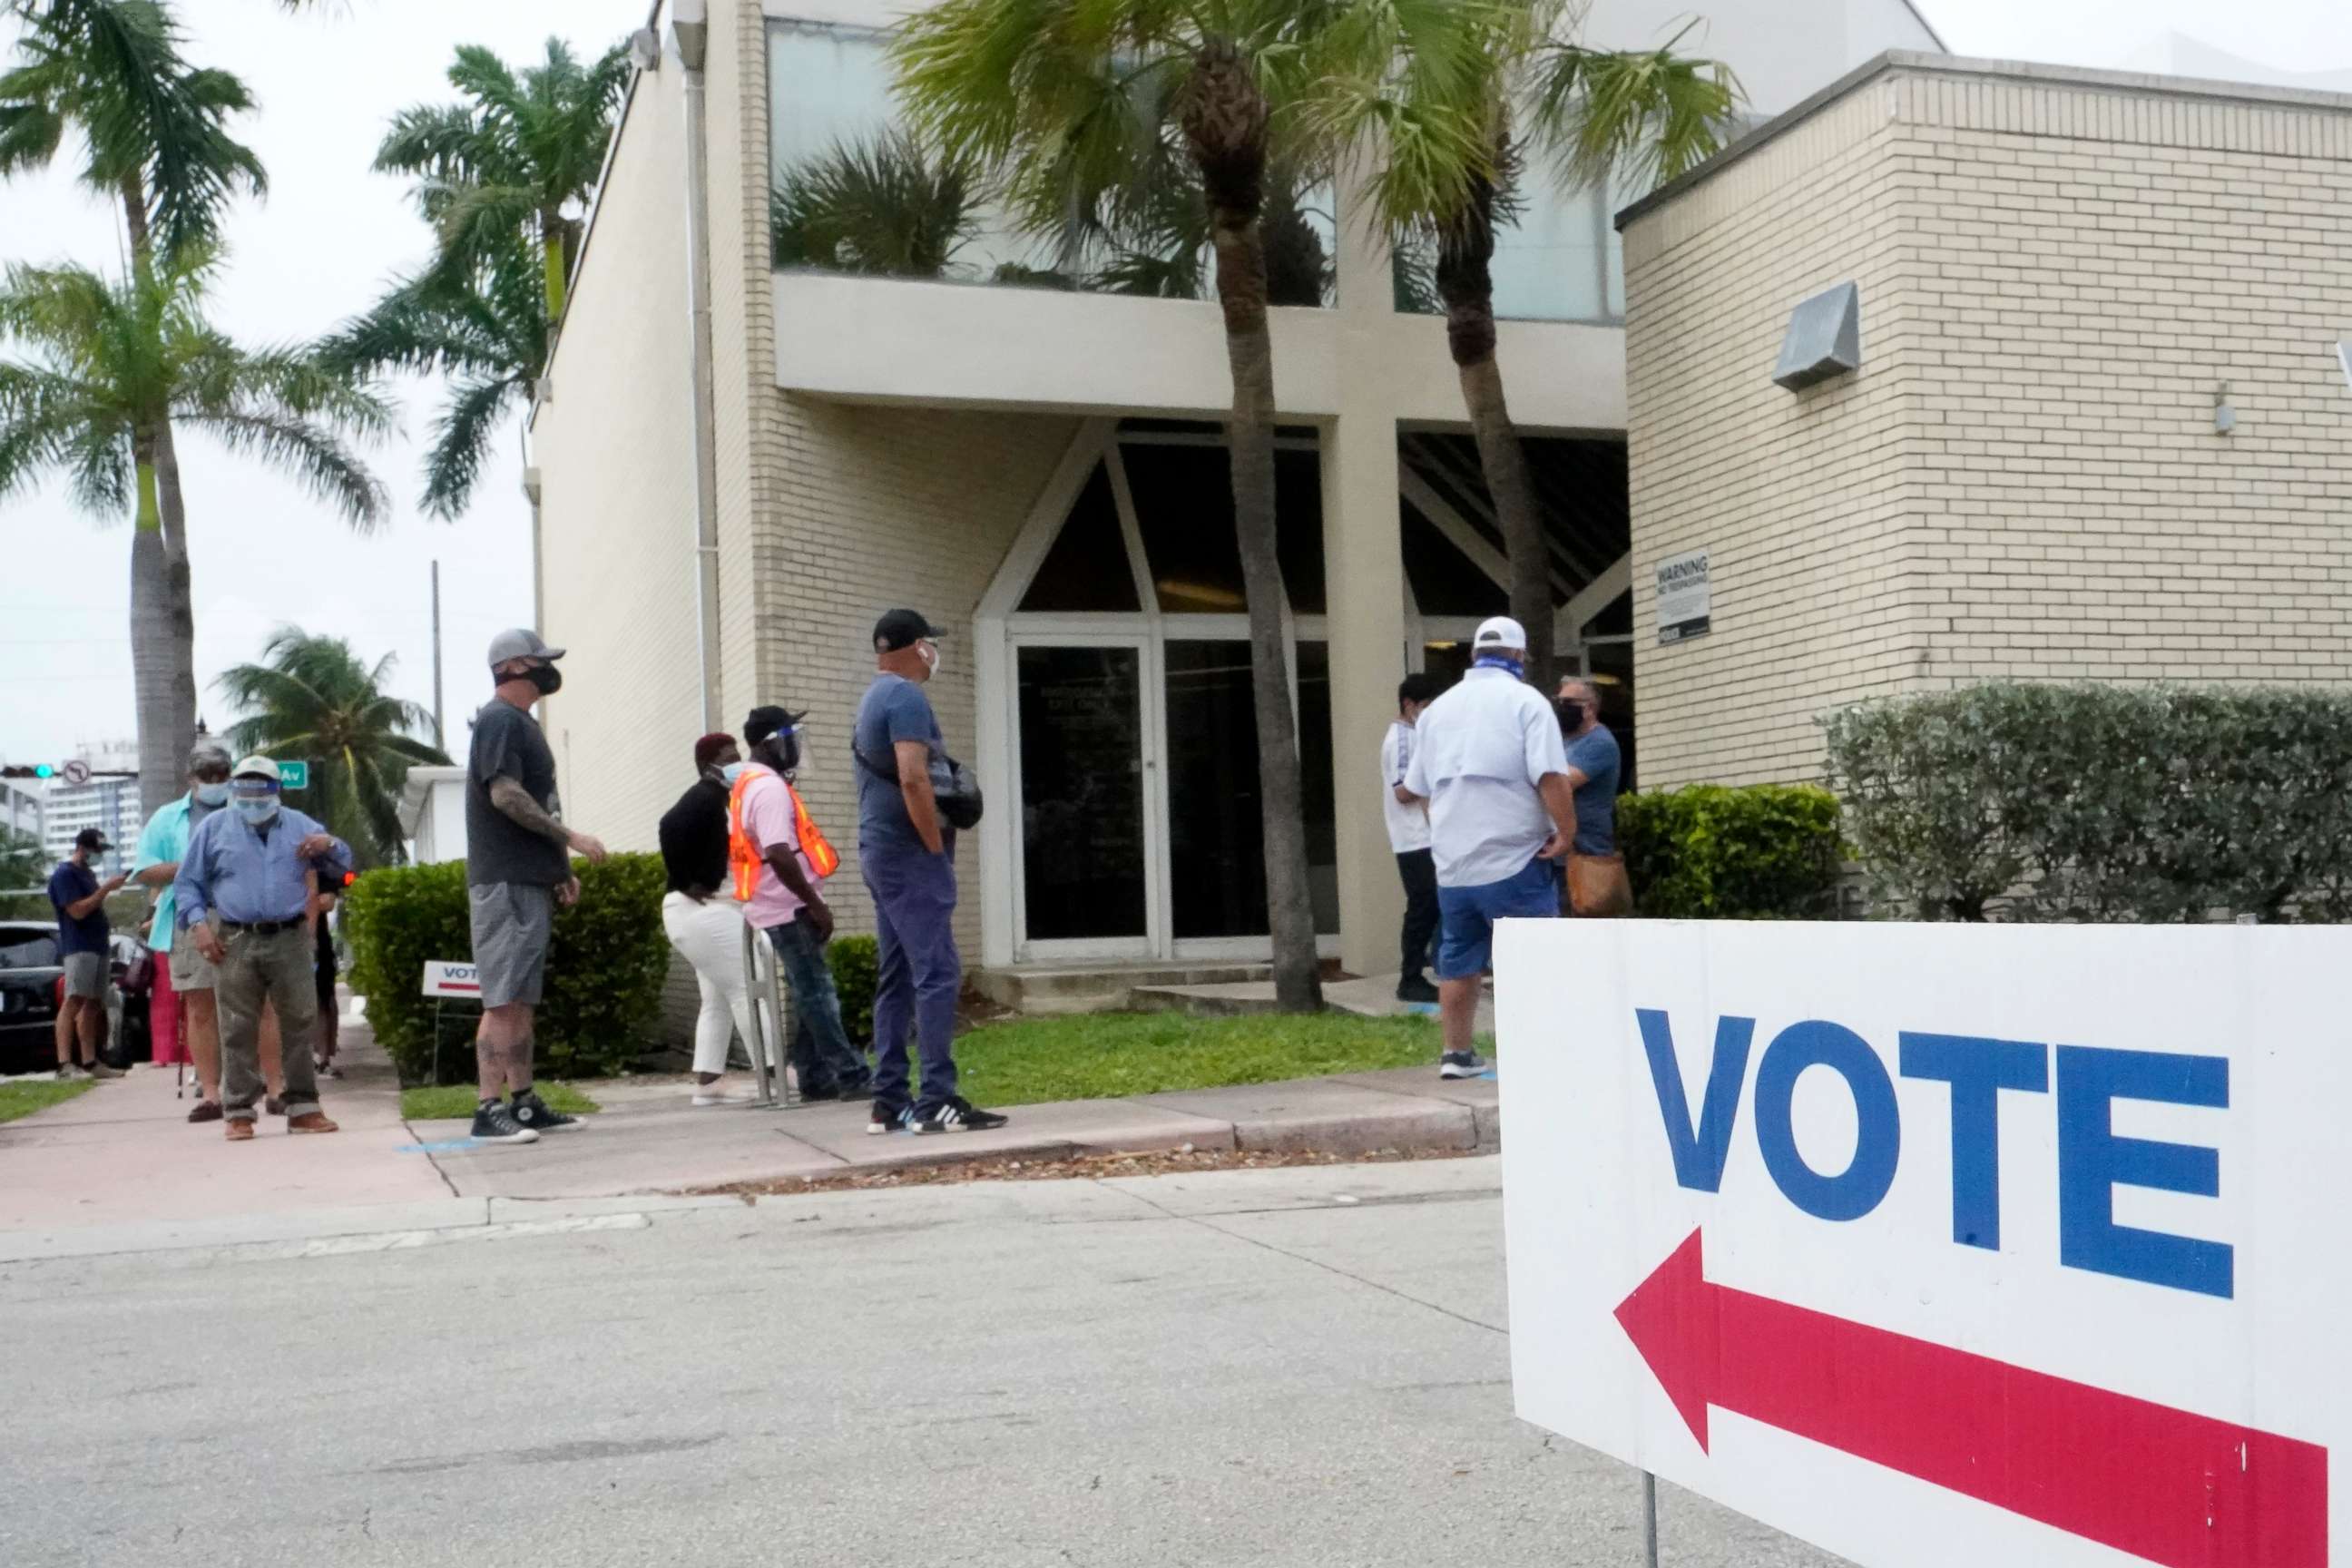 PHOTO: People wait in line to vote outside of an early voting site, Oct. 20, 2020, in Miami Beach, Fla.